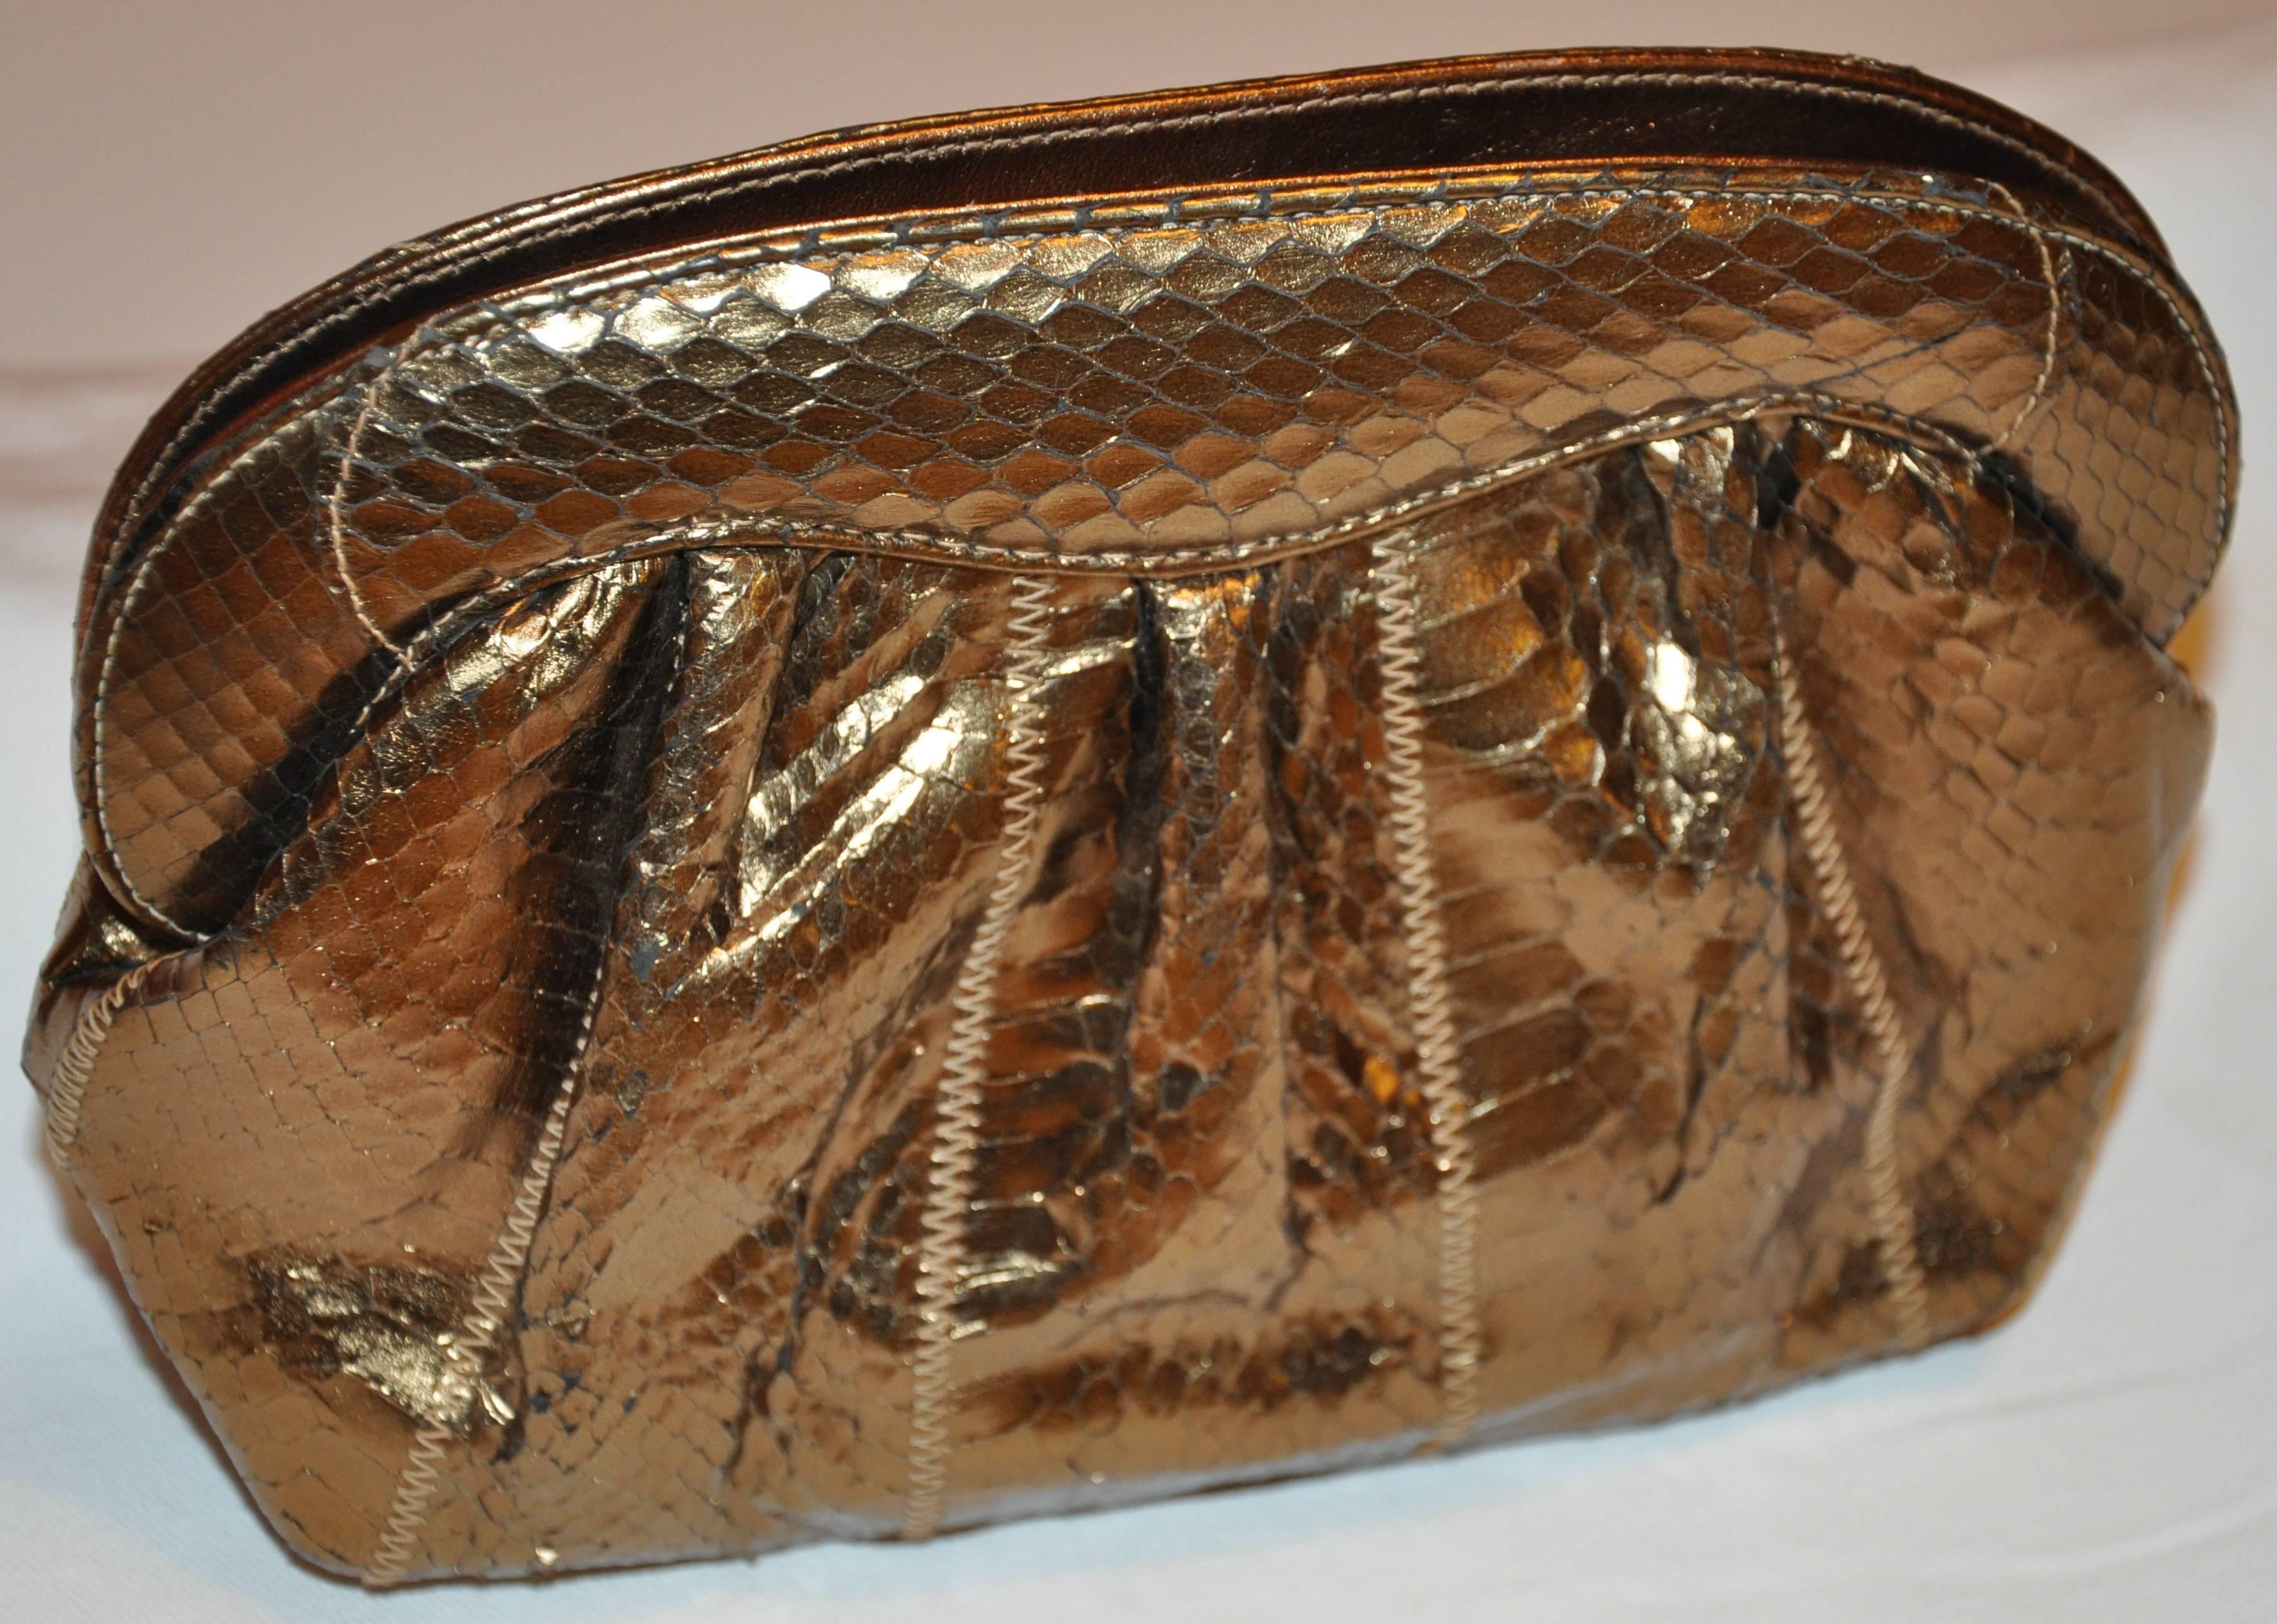        Meyers wonderfully elegant bronze pylon-skin clutch with the option to use as a shoulder bag is desired. The interior is lined with a warm tan silk. Top closure features a snap closing. The length across measures 9 inches. The height measures